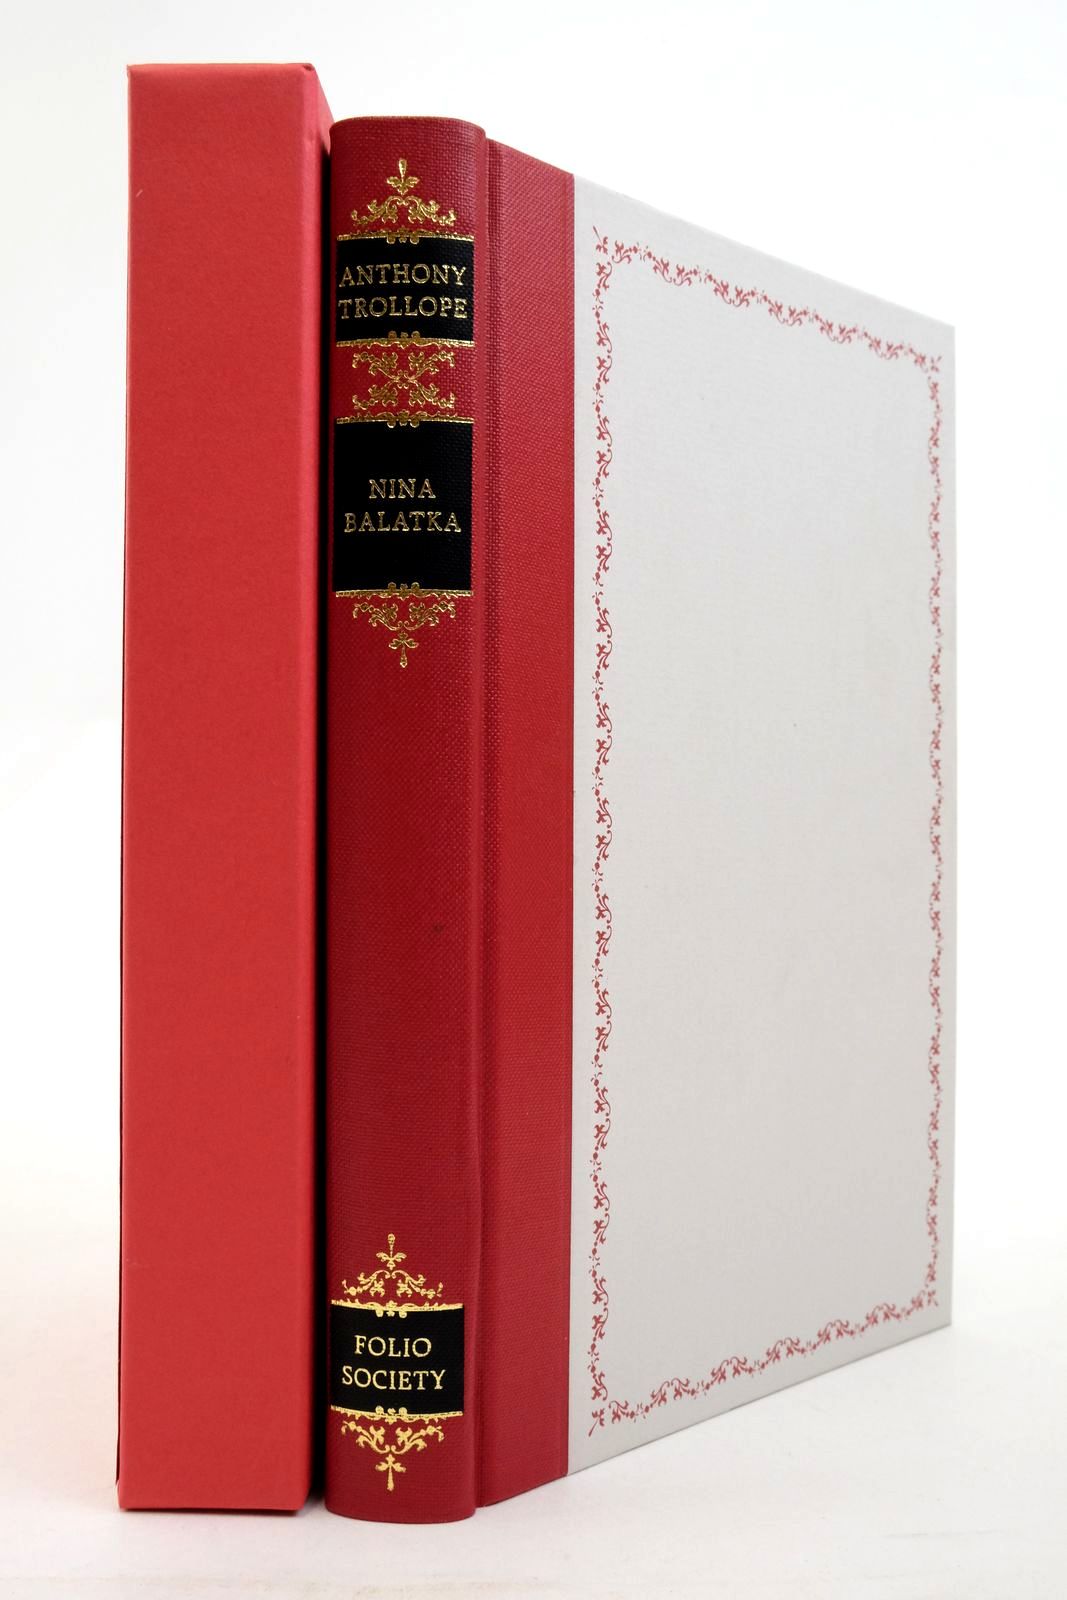 Photo of NINA BALATKA written by Trollope, Anthony Thirlwell, Angela illustrated by Waters, Rod published by Folio Society (STOCK CODE: 2138184)  for sale by Stella & Rose's Books